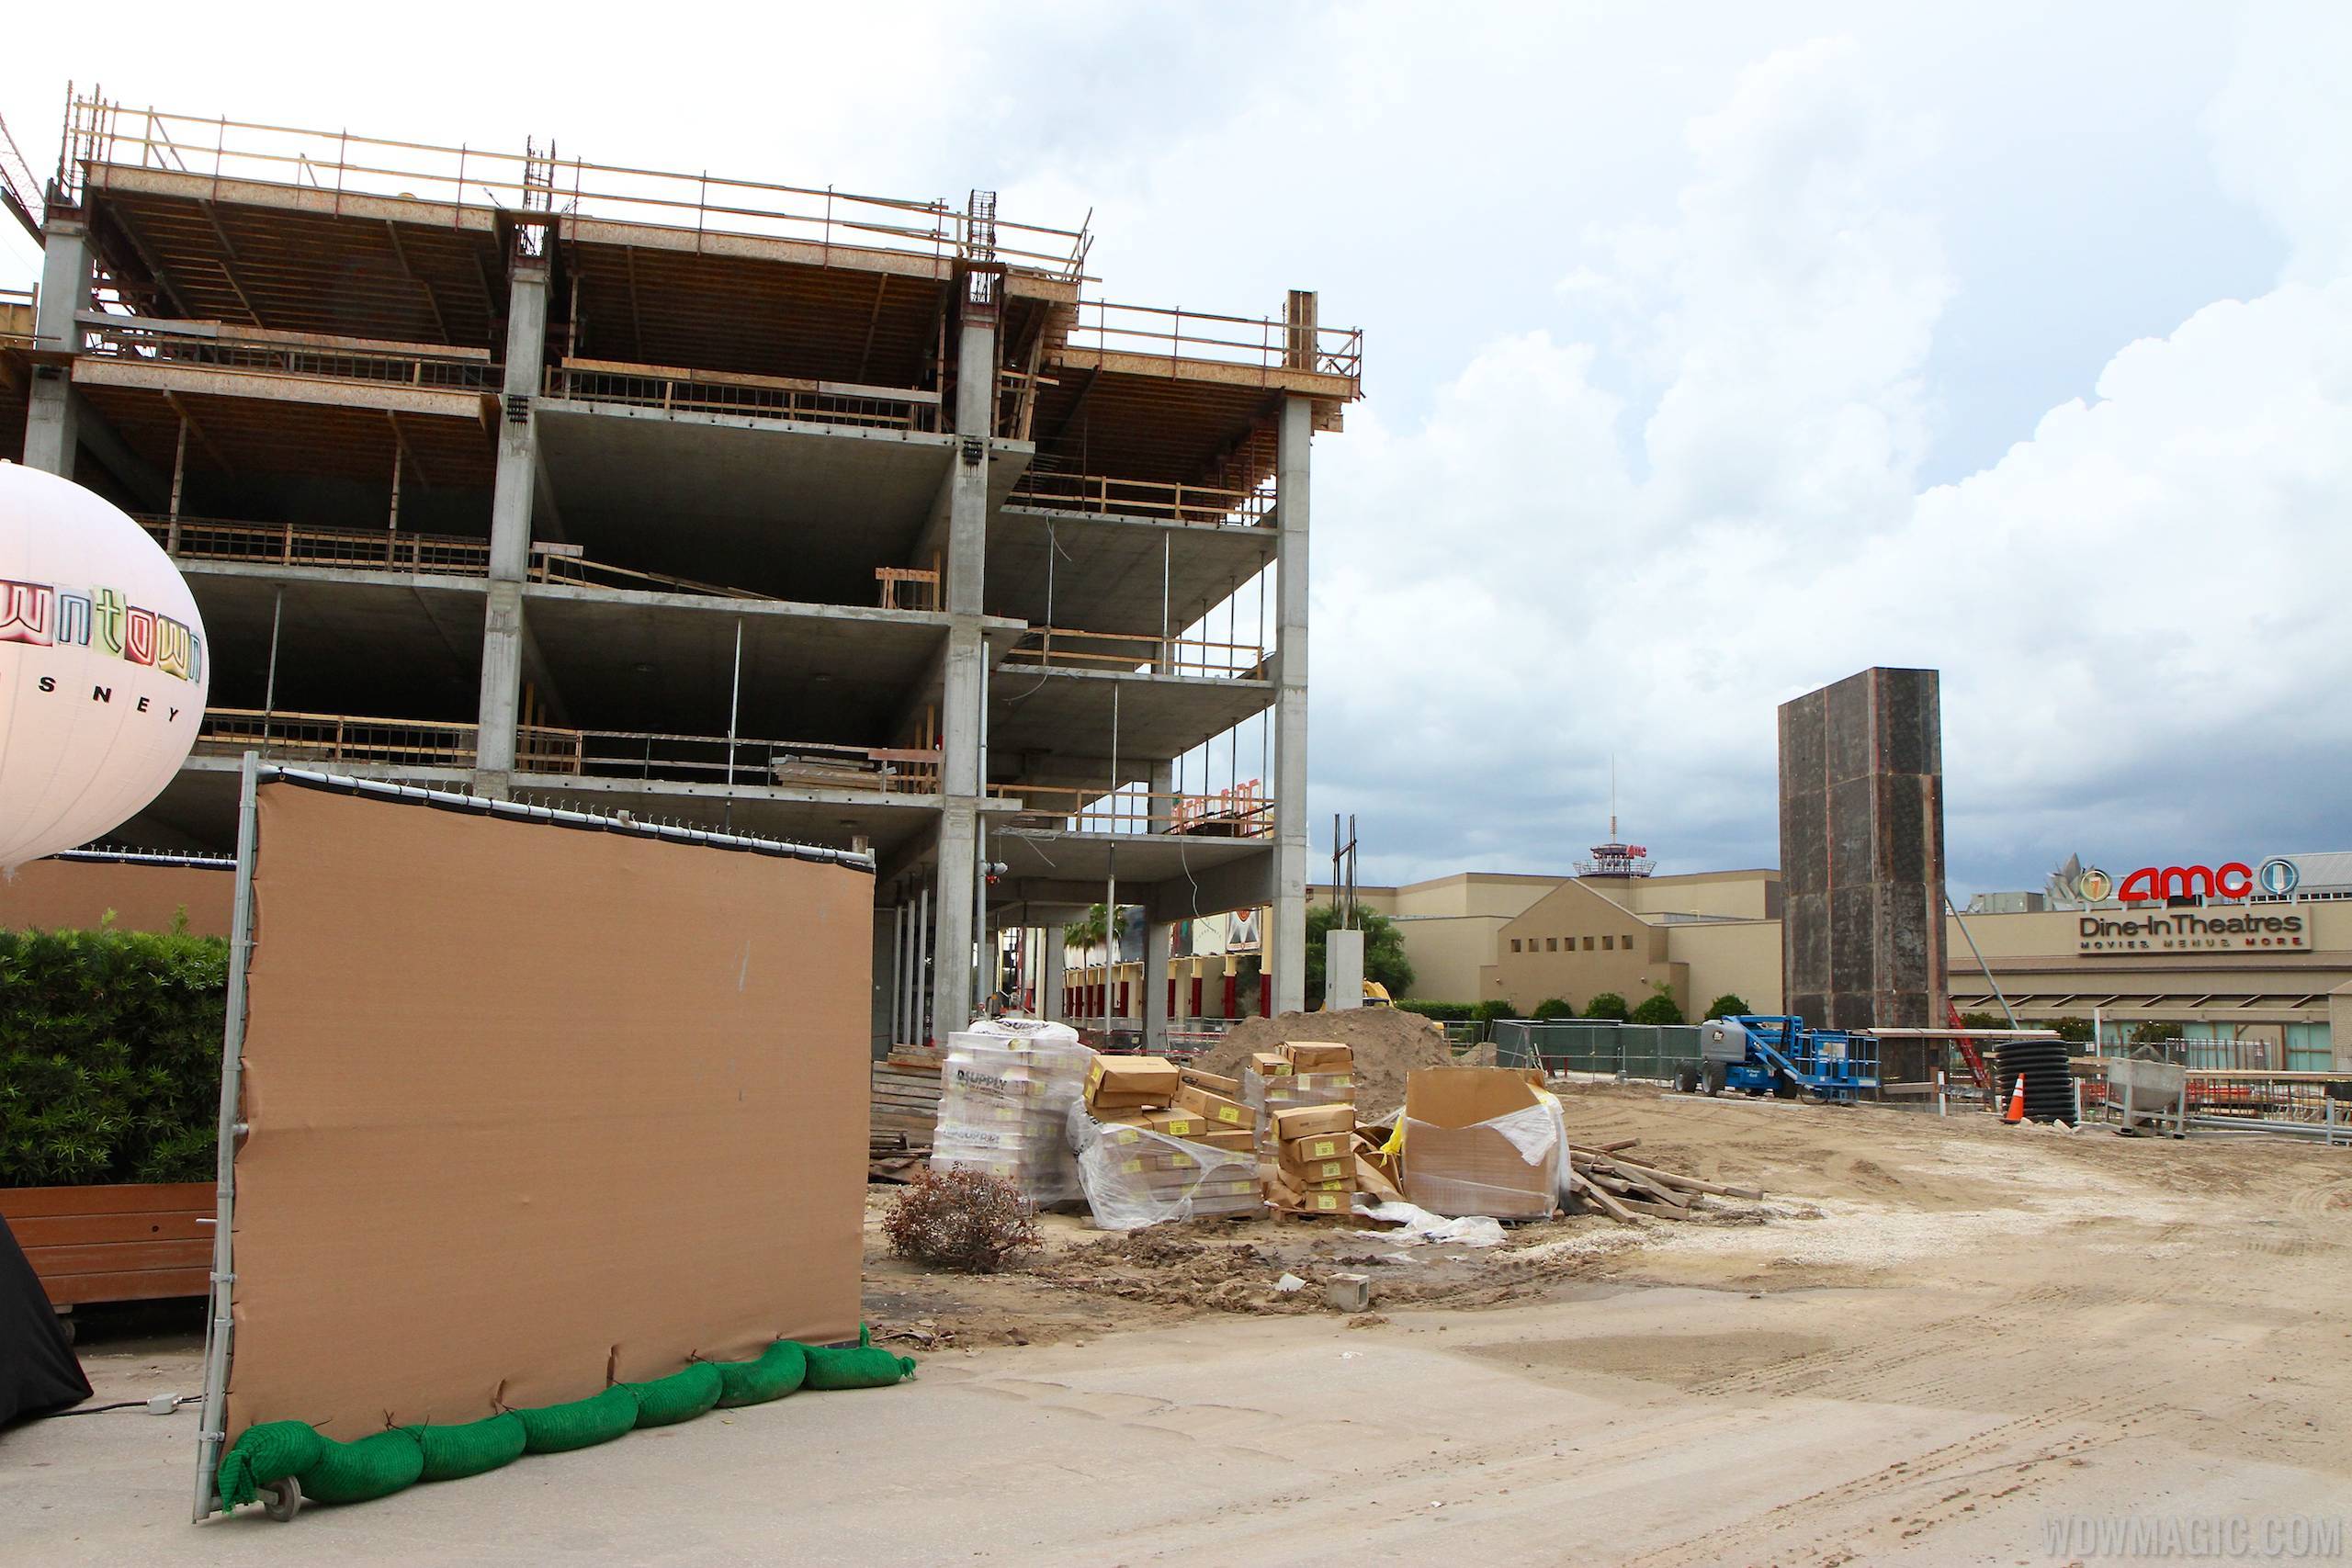 PHOTOS - Latest look at the Disney Springs West Side parking garage construction